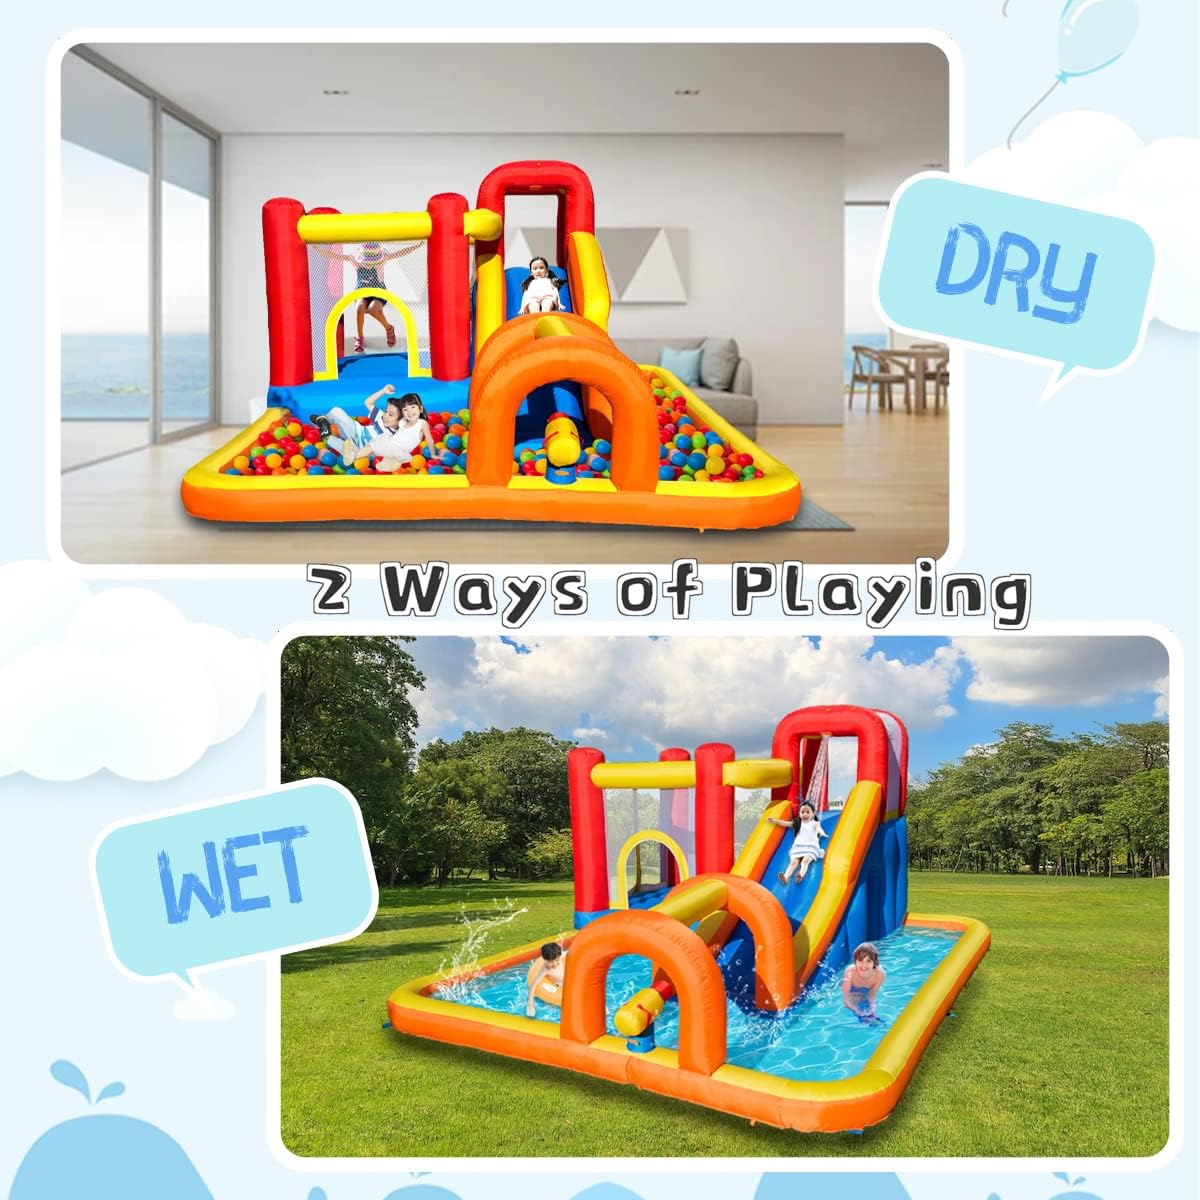 Baralir Inflatable Bouncy Castle, Large Inflatable Bounce House Water Slide Trampoline Splashing Pool Climbing Wall with Air Blower for Kids Outdoor Indoor Play, 3.96 x 3.2 x 1.96m